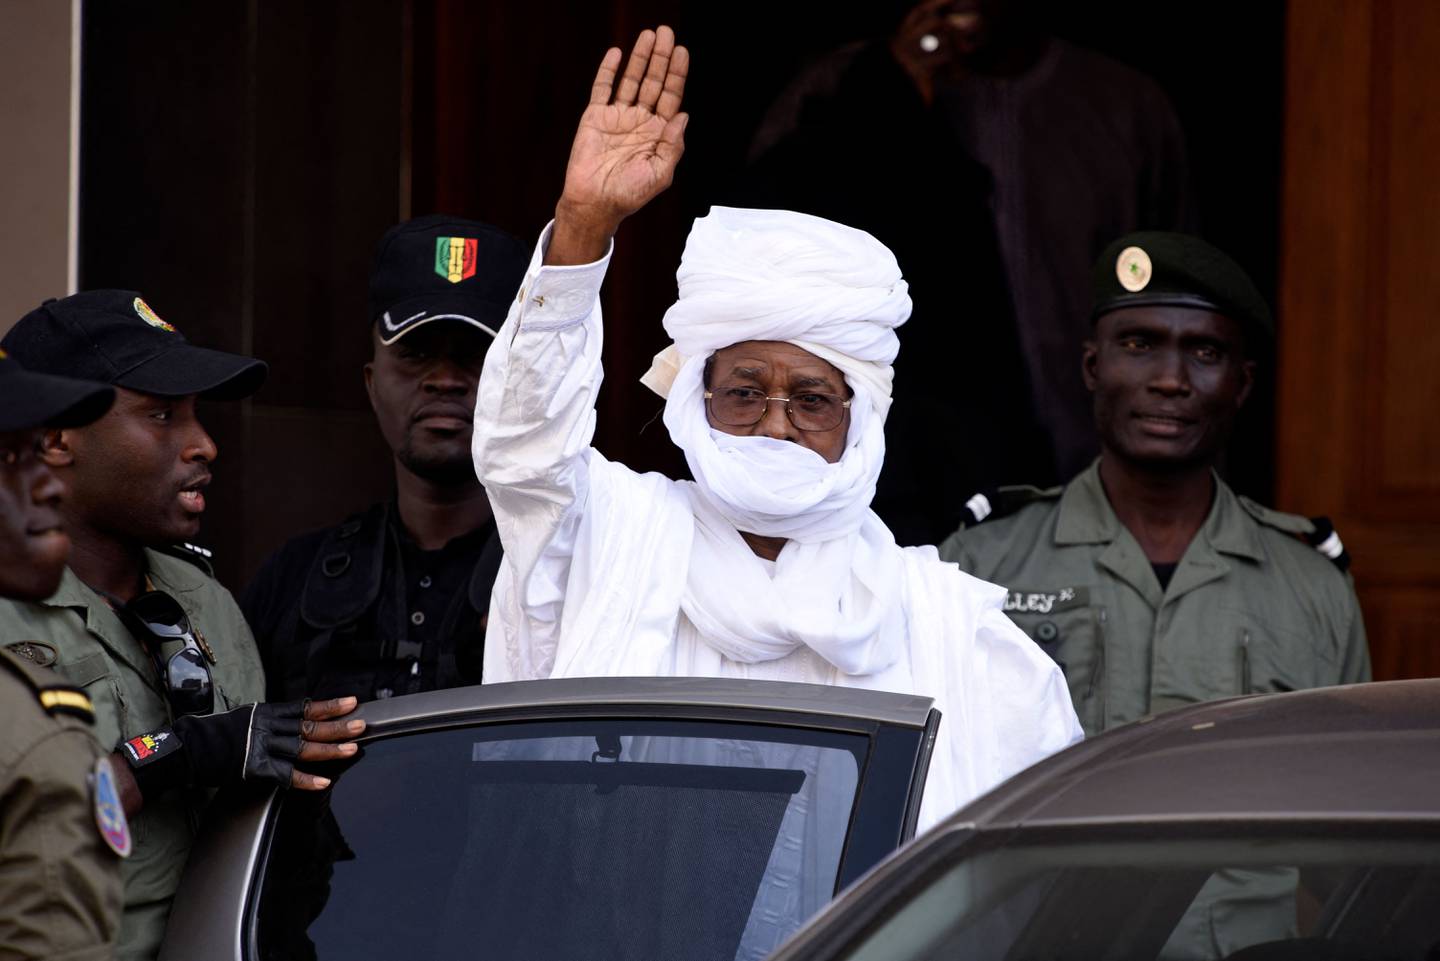 (FILES) In this file photo taken on June 03, 2015 Former Chadian President Hissene Habre gestures as he leaves a Dakar courthouse after an identity hearing. - Former Chadian President Hissène Habré has died at the age of 79 in Senegal, where he was sentenced to life imprisonment in 2016 for crimes against humanity after an unprecedented trial, Senegalese Justice Minister Malick Sall said on August 24, 2021. (Photo by SEYLLOU / AFP)